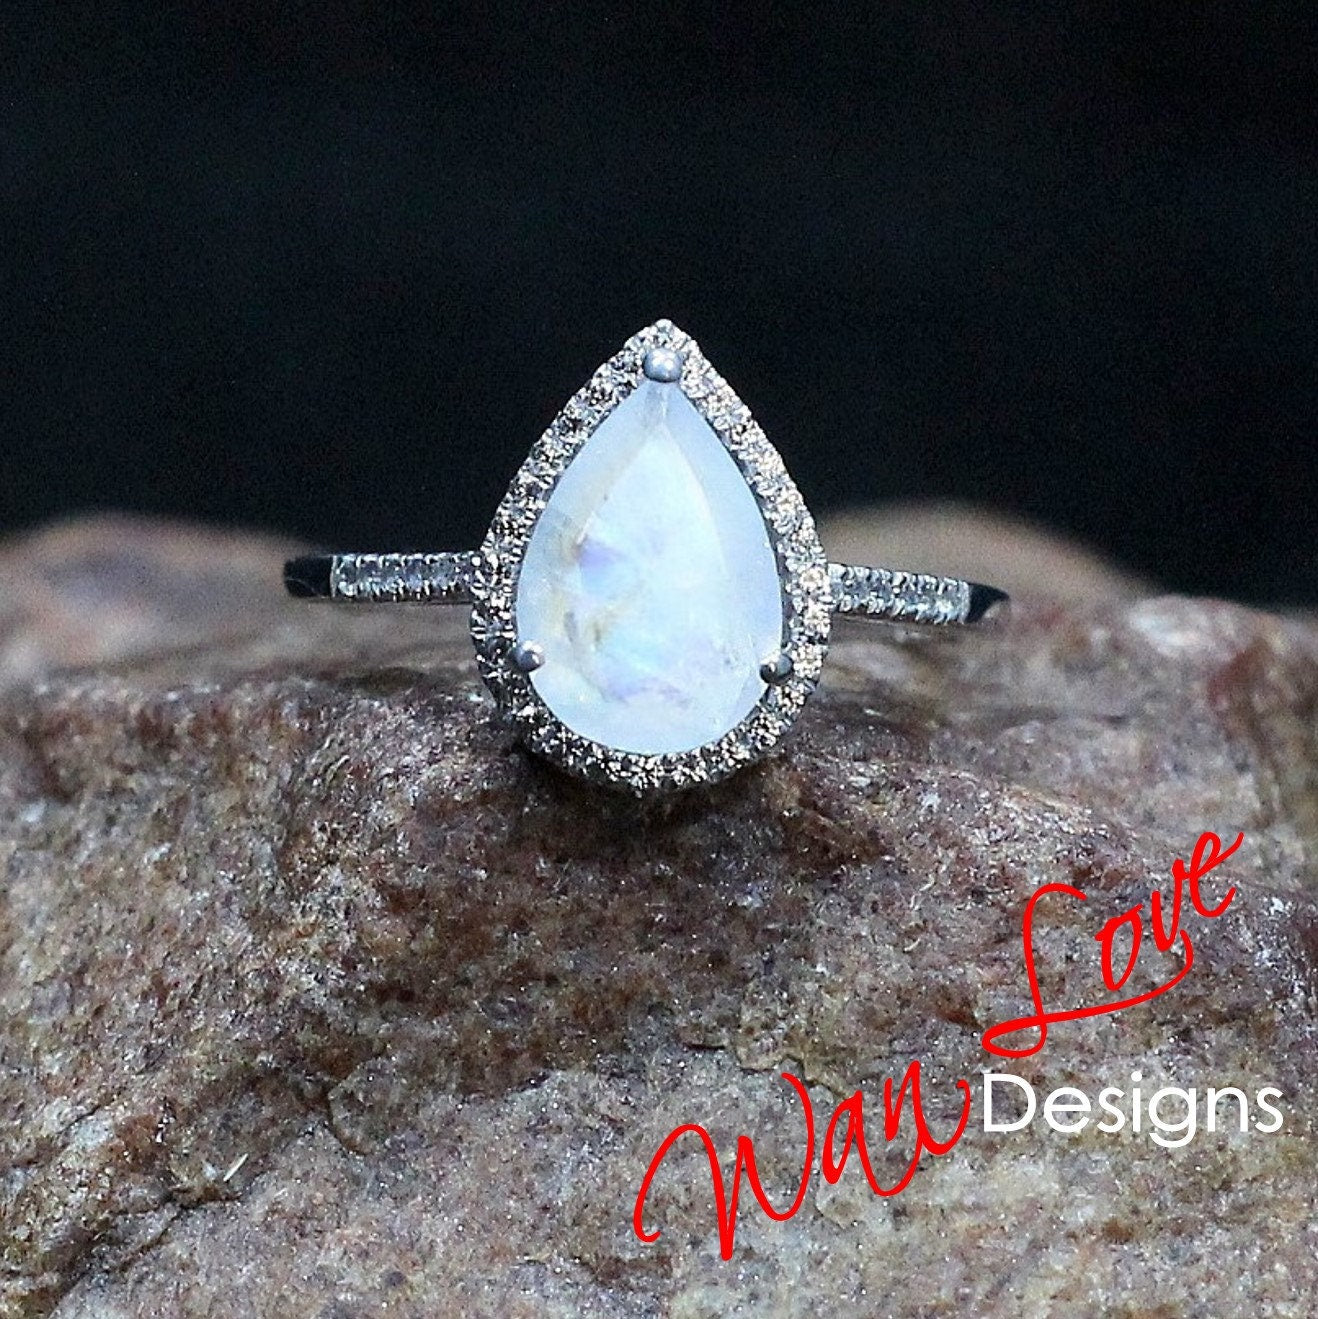 Moonstone & White Sapphire Pear Halo Engagement Ring 2.5ct vintage halo ring bridal Weddin ring promise ring Anniversary Gift-Ready to Ship Wan Love Designs